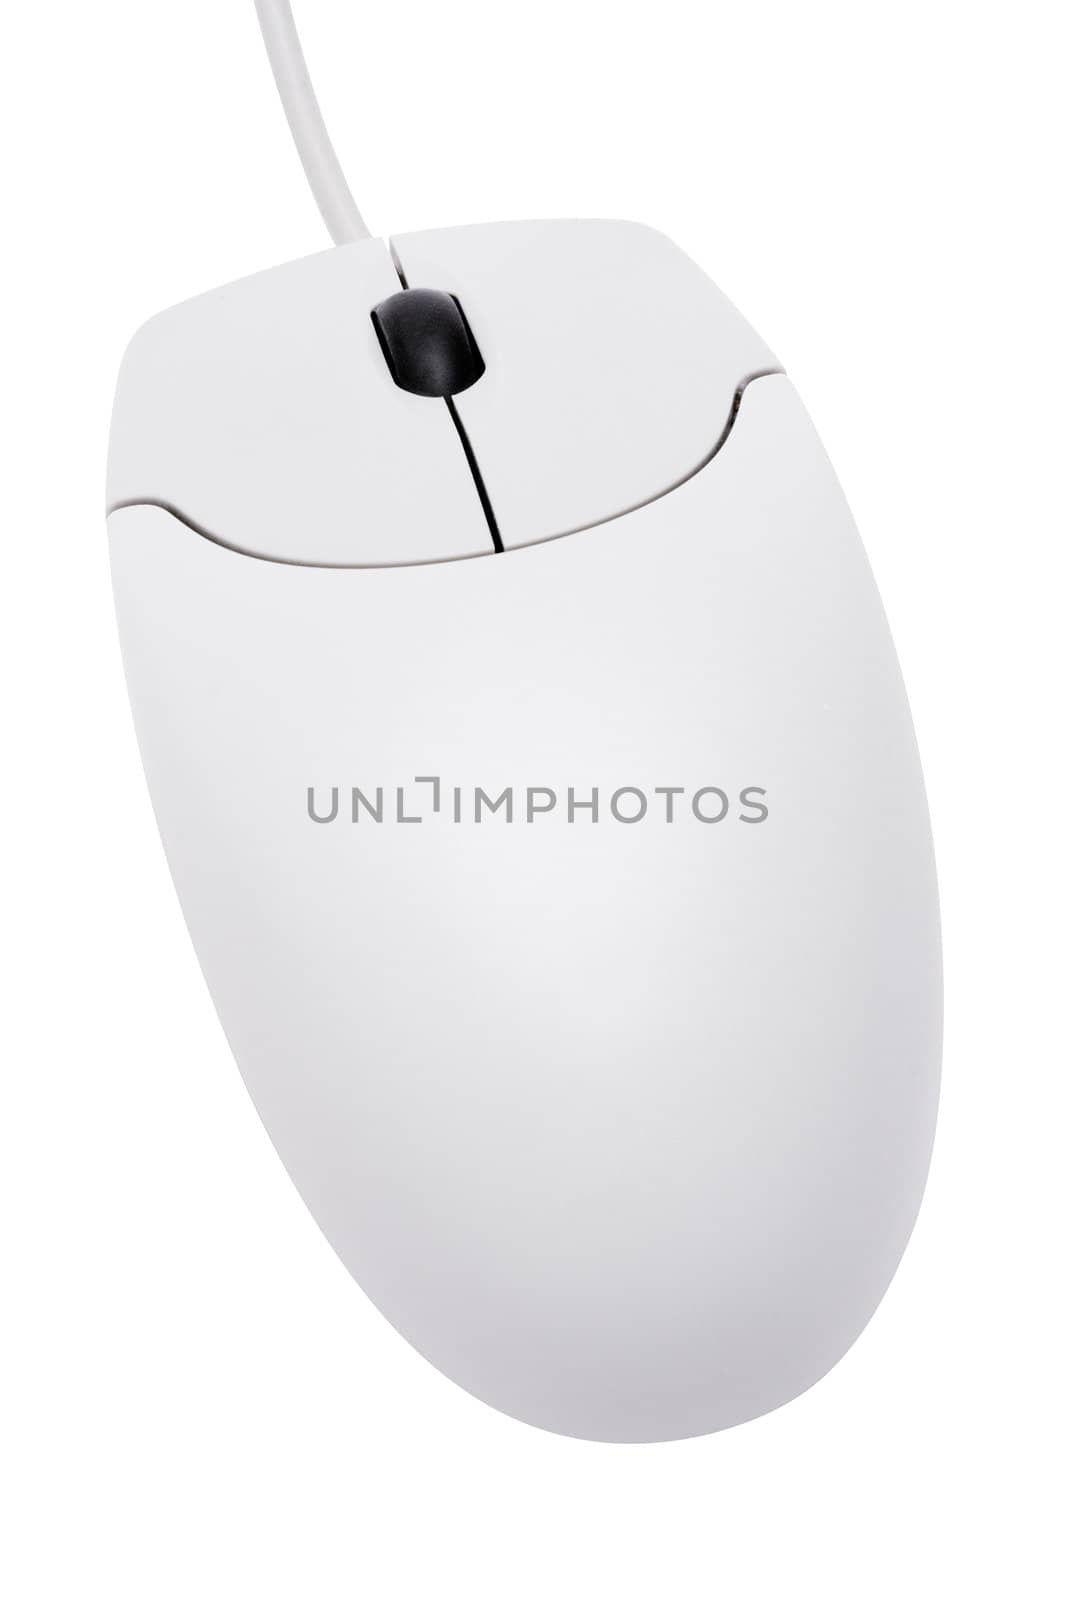 White computer mouse isolated on a white background. File contains clipping path.